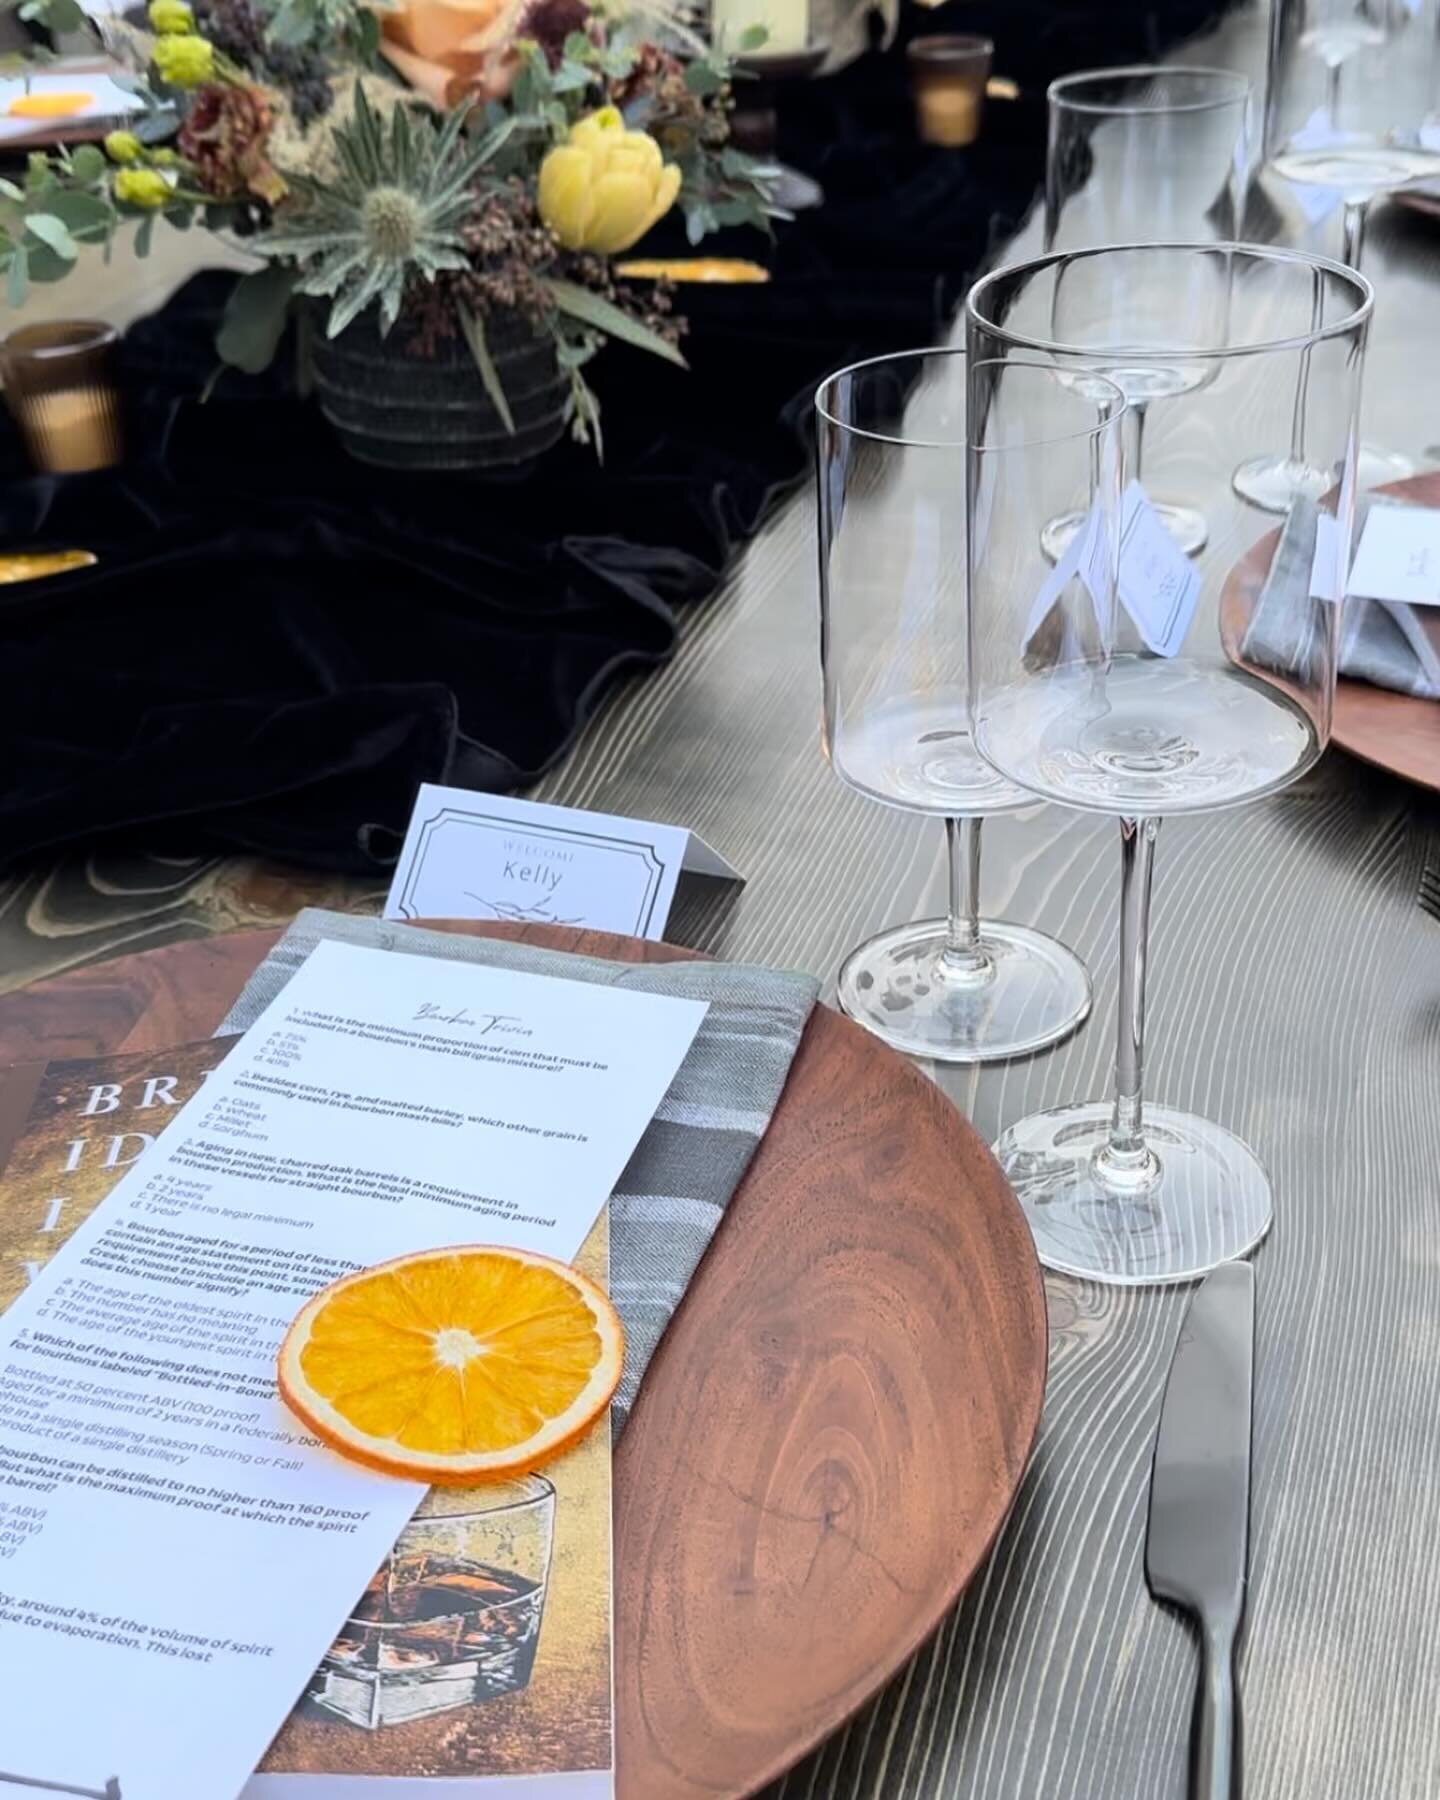 Our recent Bourbon Tasting and Dinner pairing event was an exquisitely curated experience. The masculine design featured wood tables, black leather chairs, and wood plate charger rentals from our friends @brighteventrentals event rentals
created a re